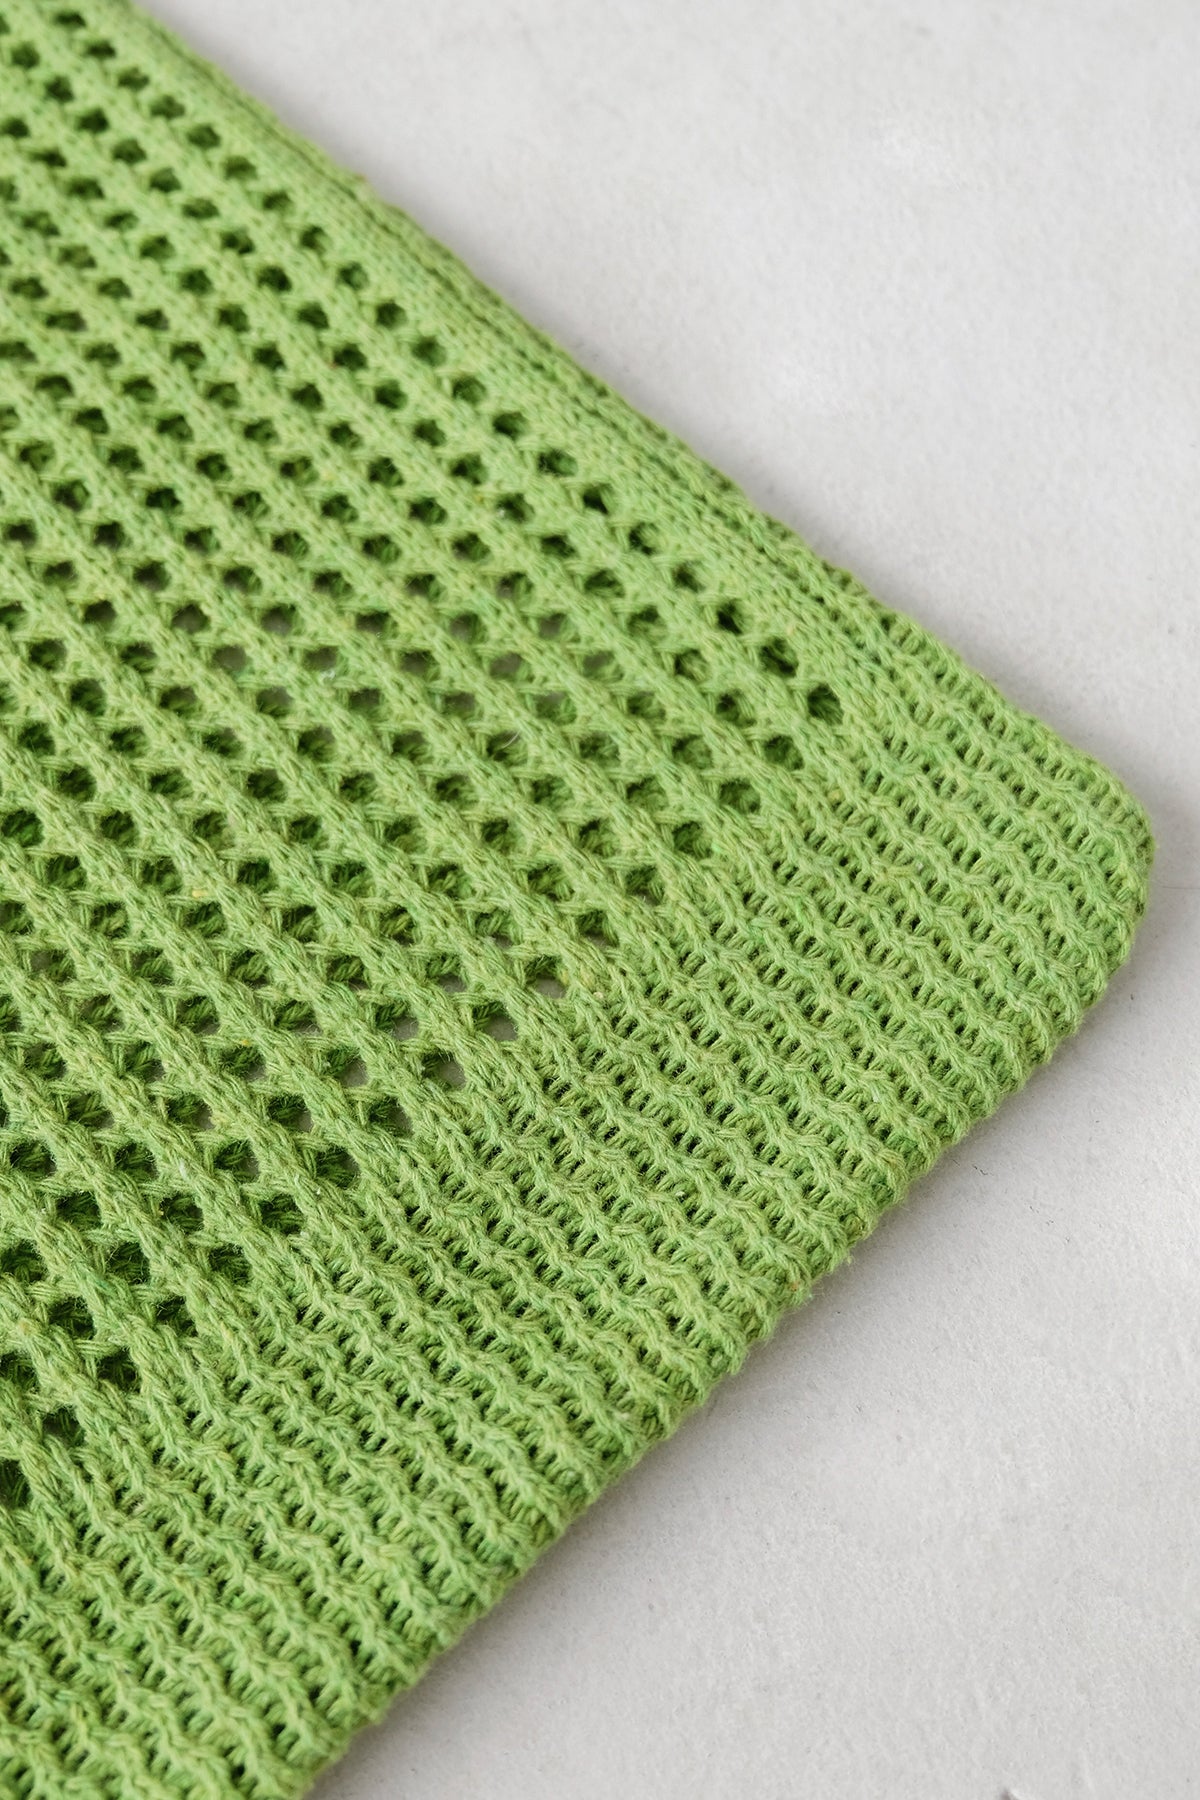 Terry Knit Tote Bag In Green